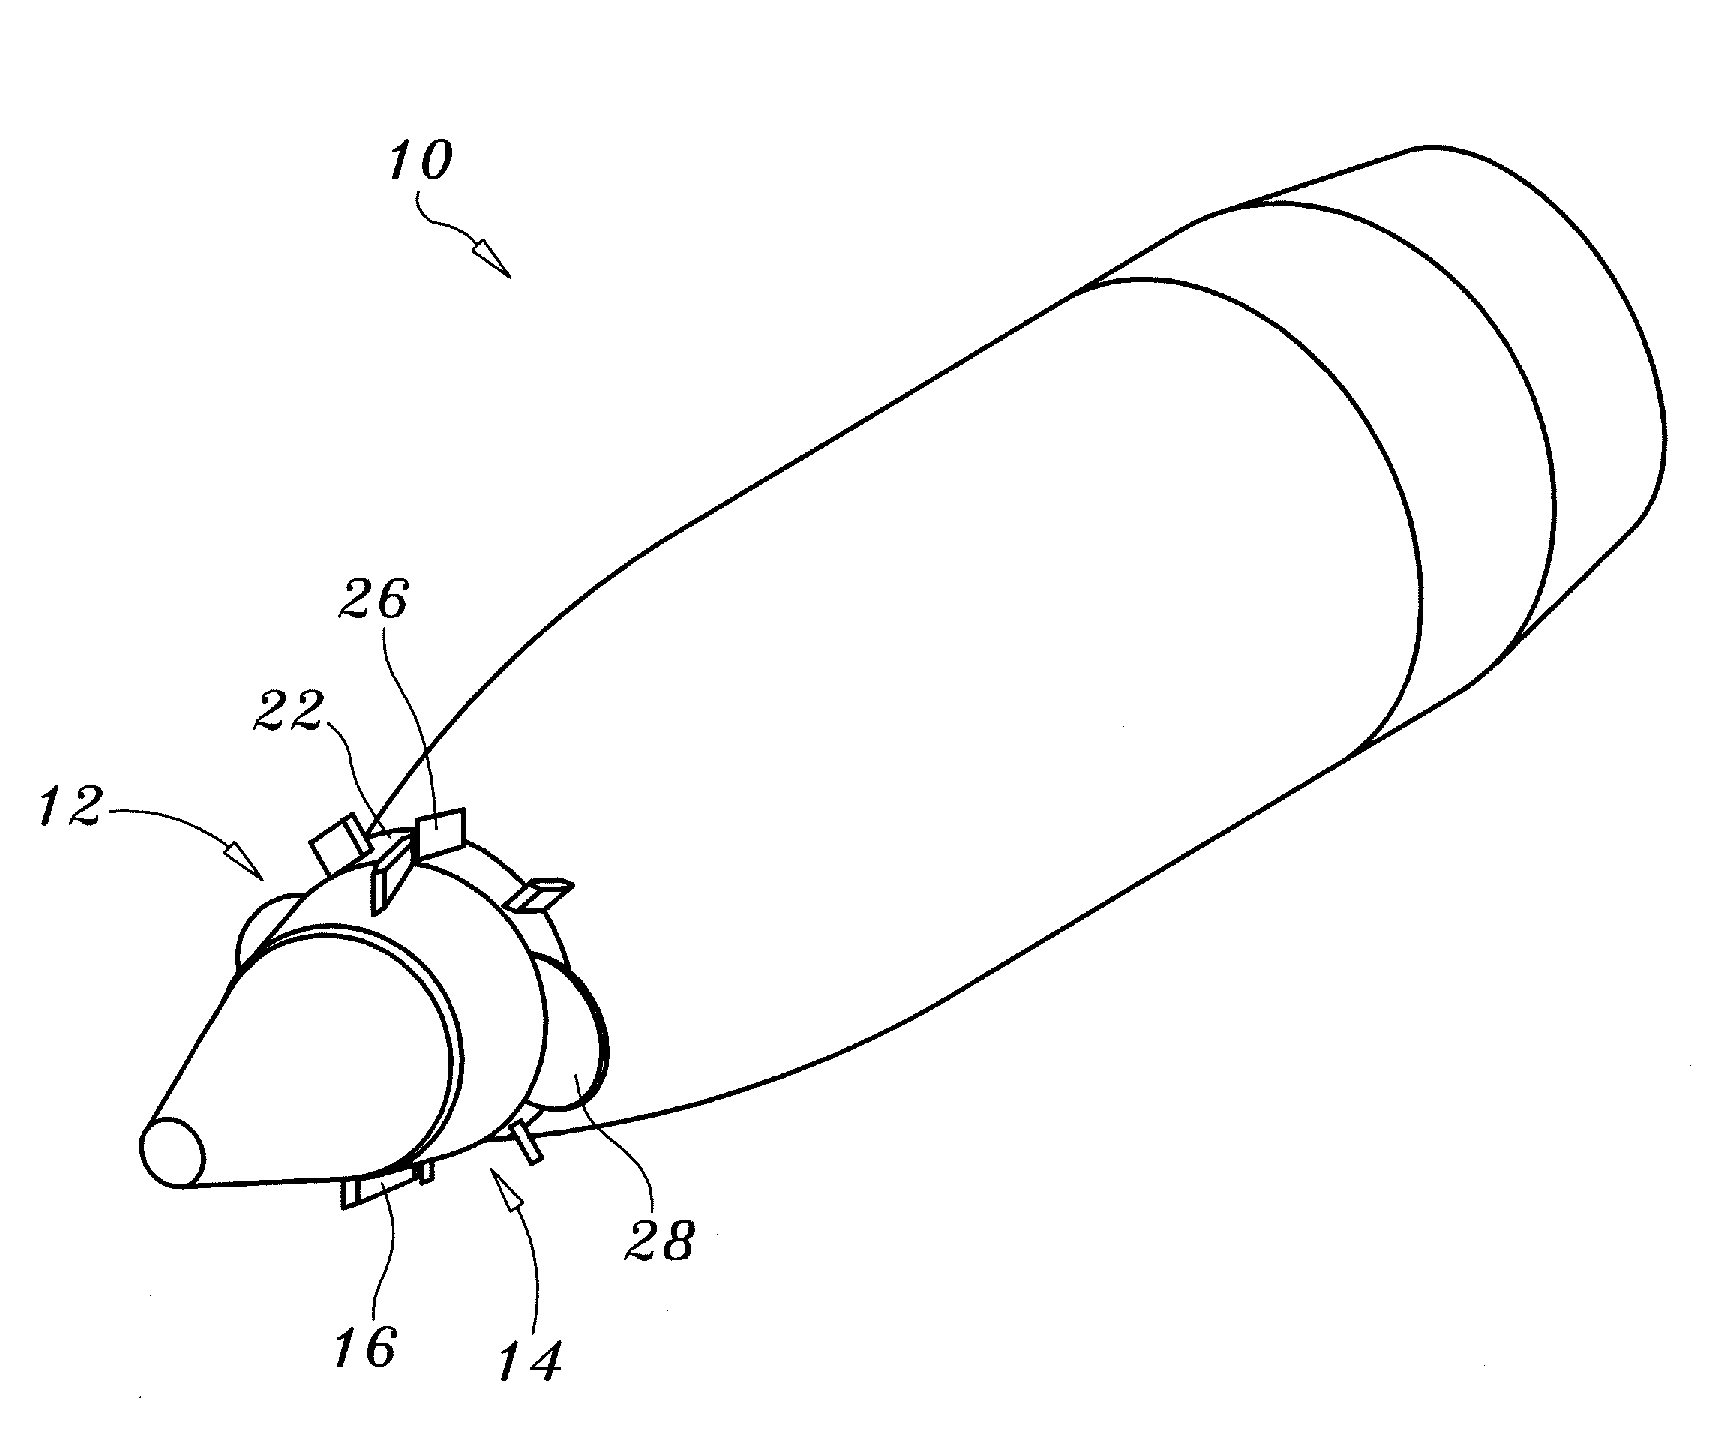 Trajectory modification of a spinning projectile